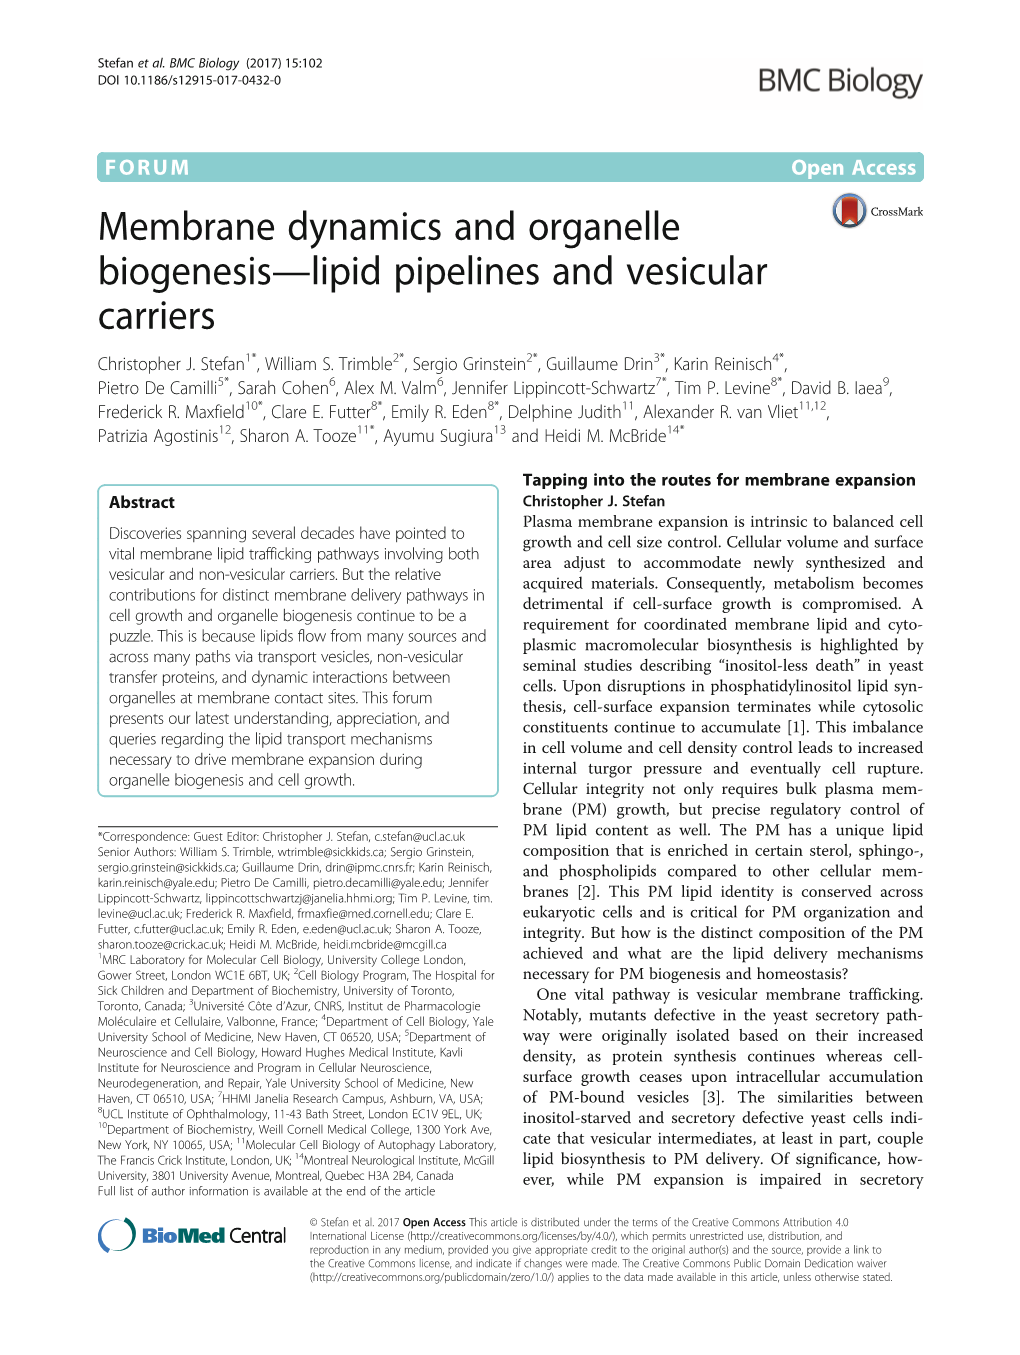 Membrane Dynamics and Organelle Biogenesis—Lipid Pipelines and Vesicular Carriers Christopher J